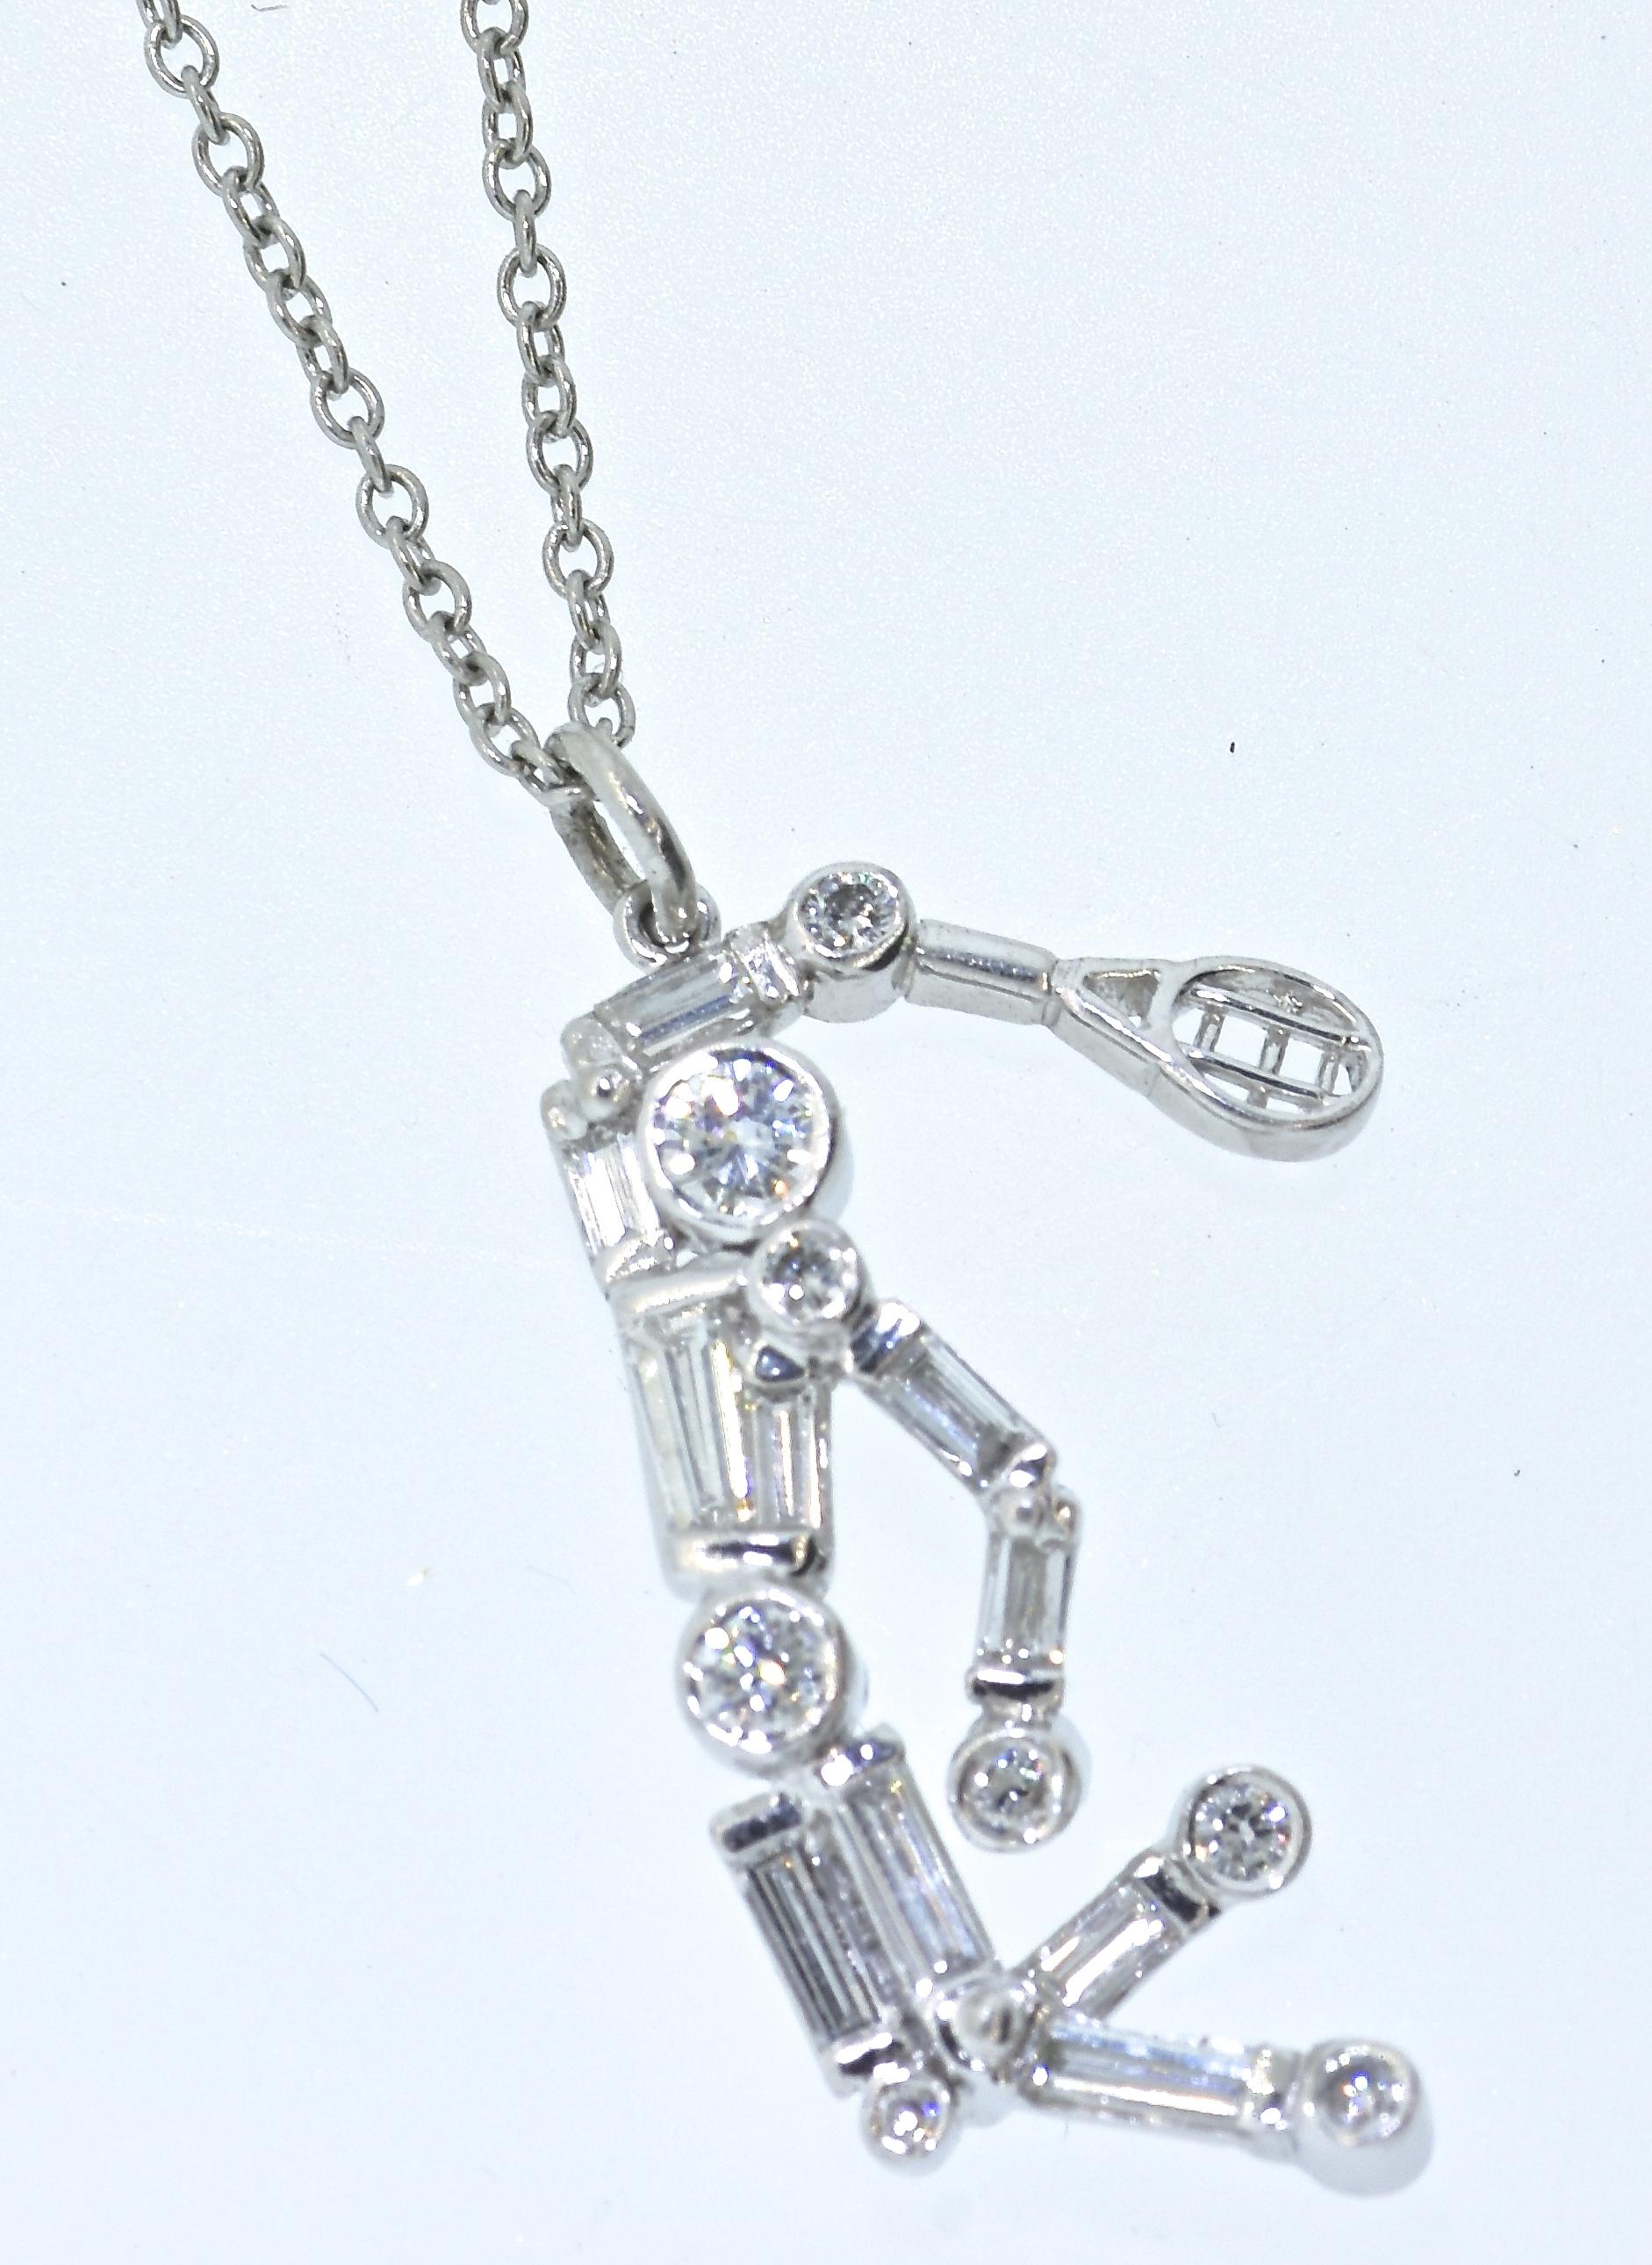 Platinum hand made tennis player with .98 cts of fancy cut fine white diamonds.  There are baguette cut diamonds, tapered baguettes and round modern brilliant cut diamonds.  All of these stones are colorless to near colorless (F/G) and very slightly